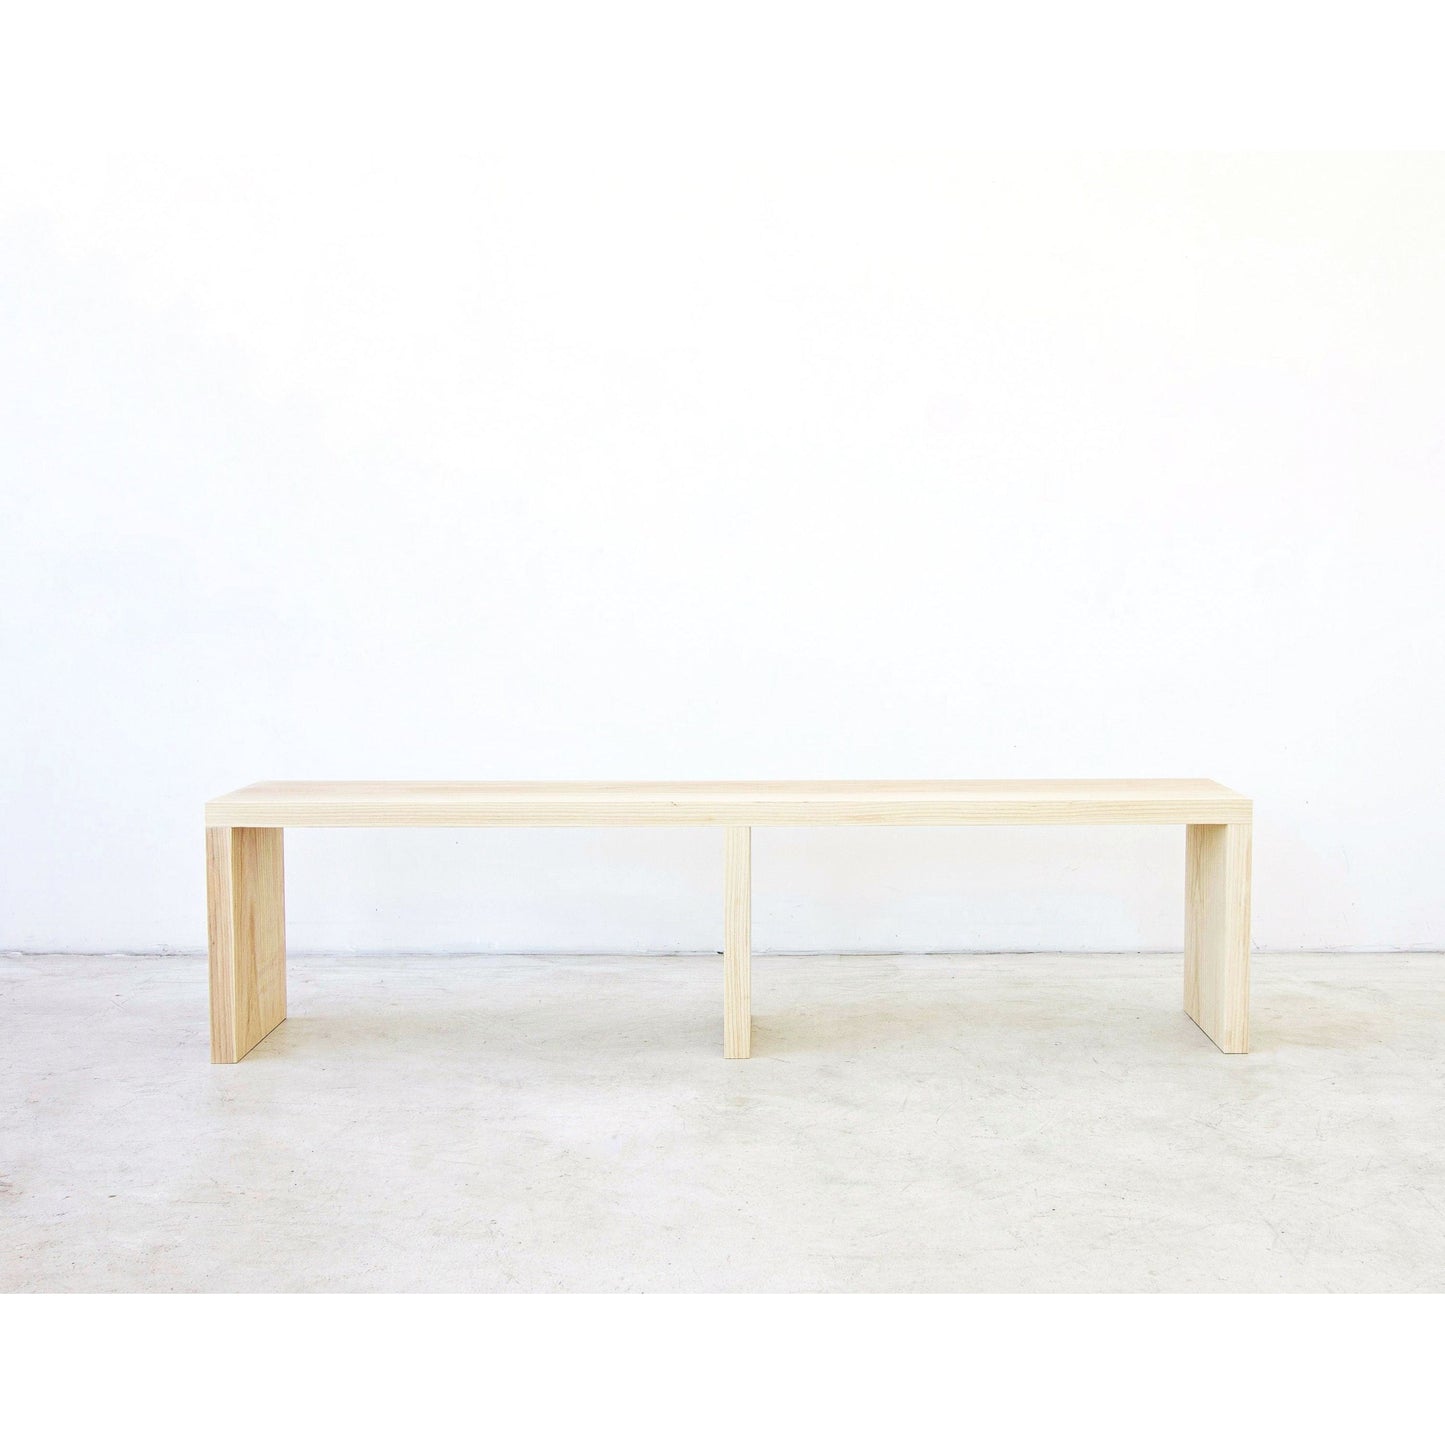 Solid Wood Ash Bench | Minimalist design wood bench | Made in LA